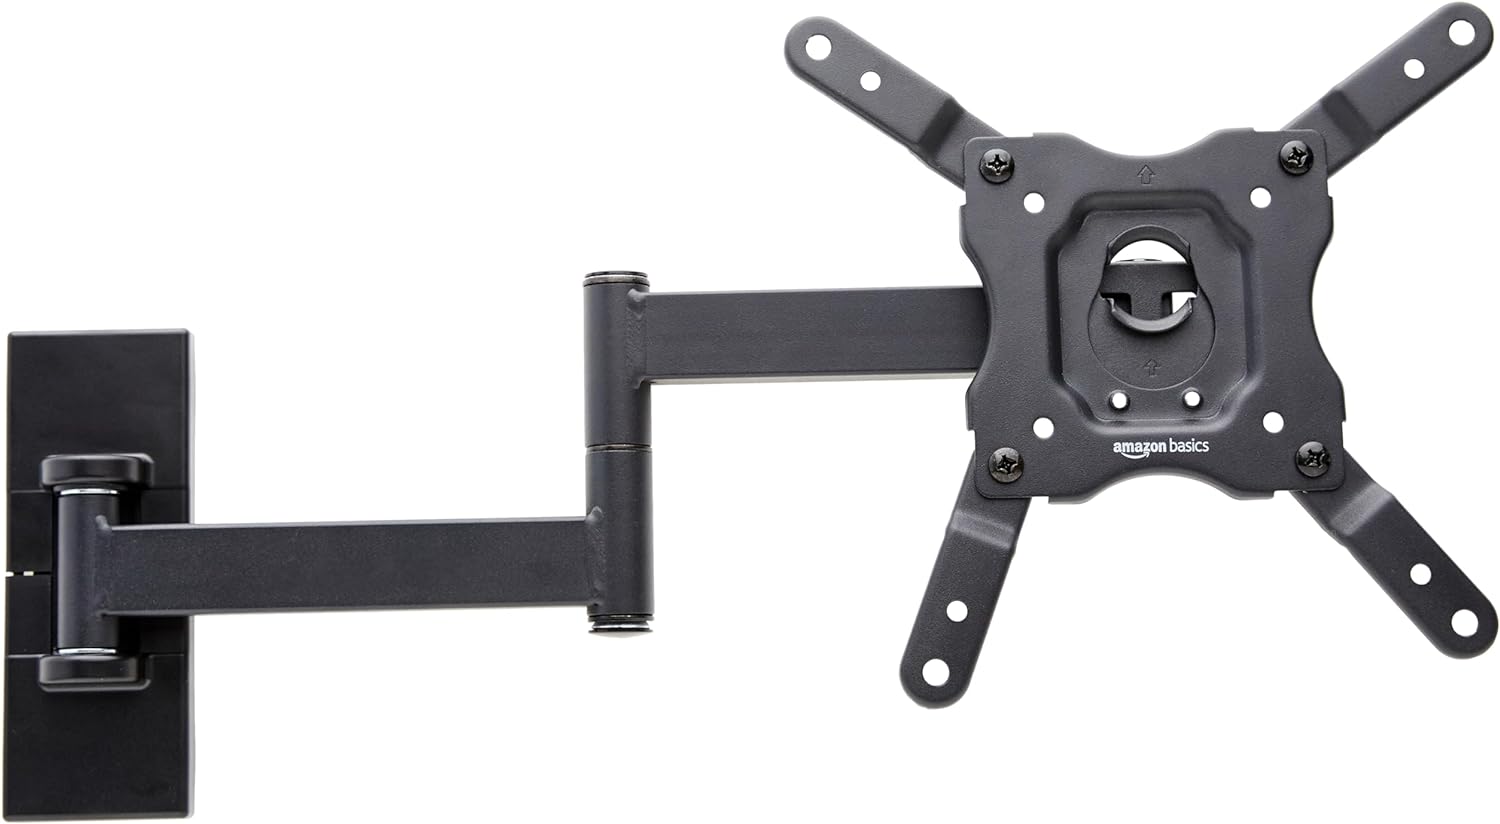 Amazon Basics Articulating TV Wall Mount for Most 12" to 39" TVs